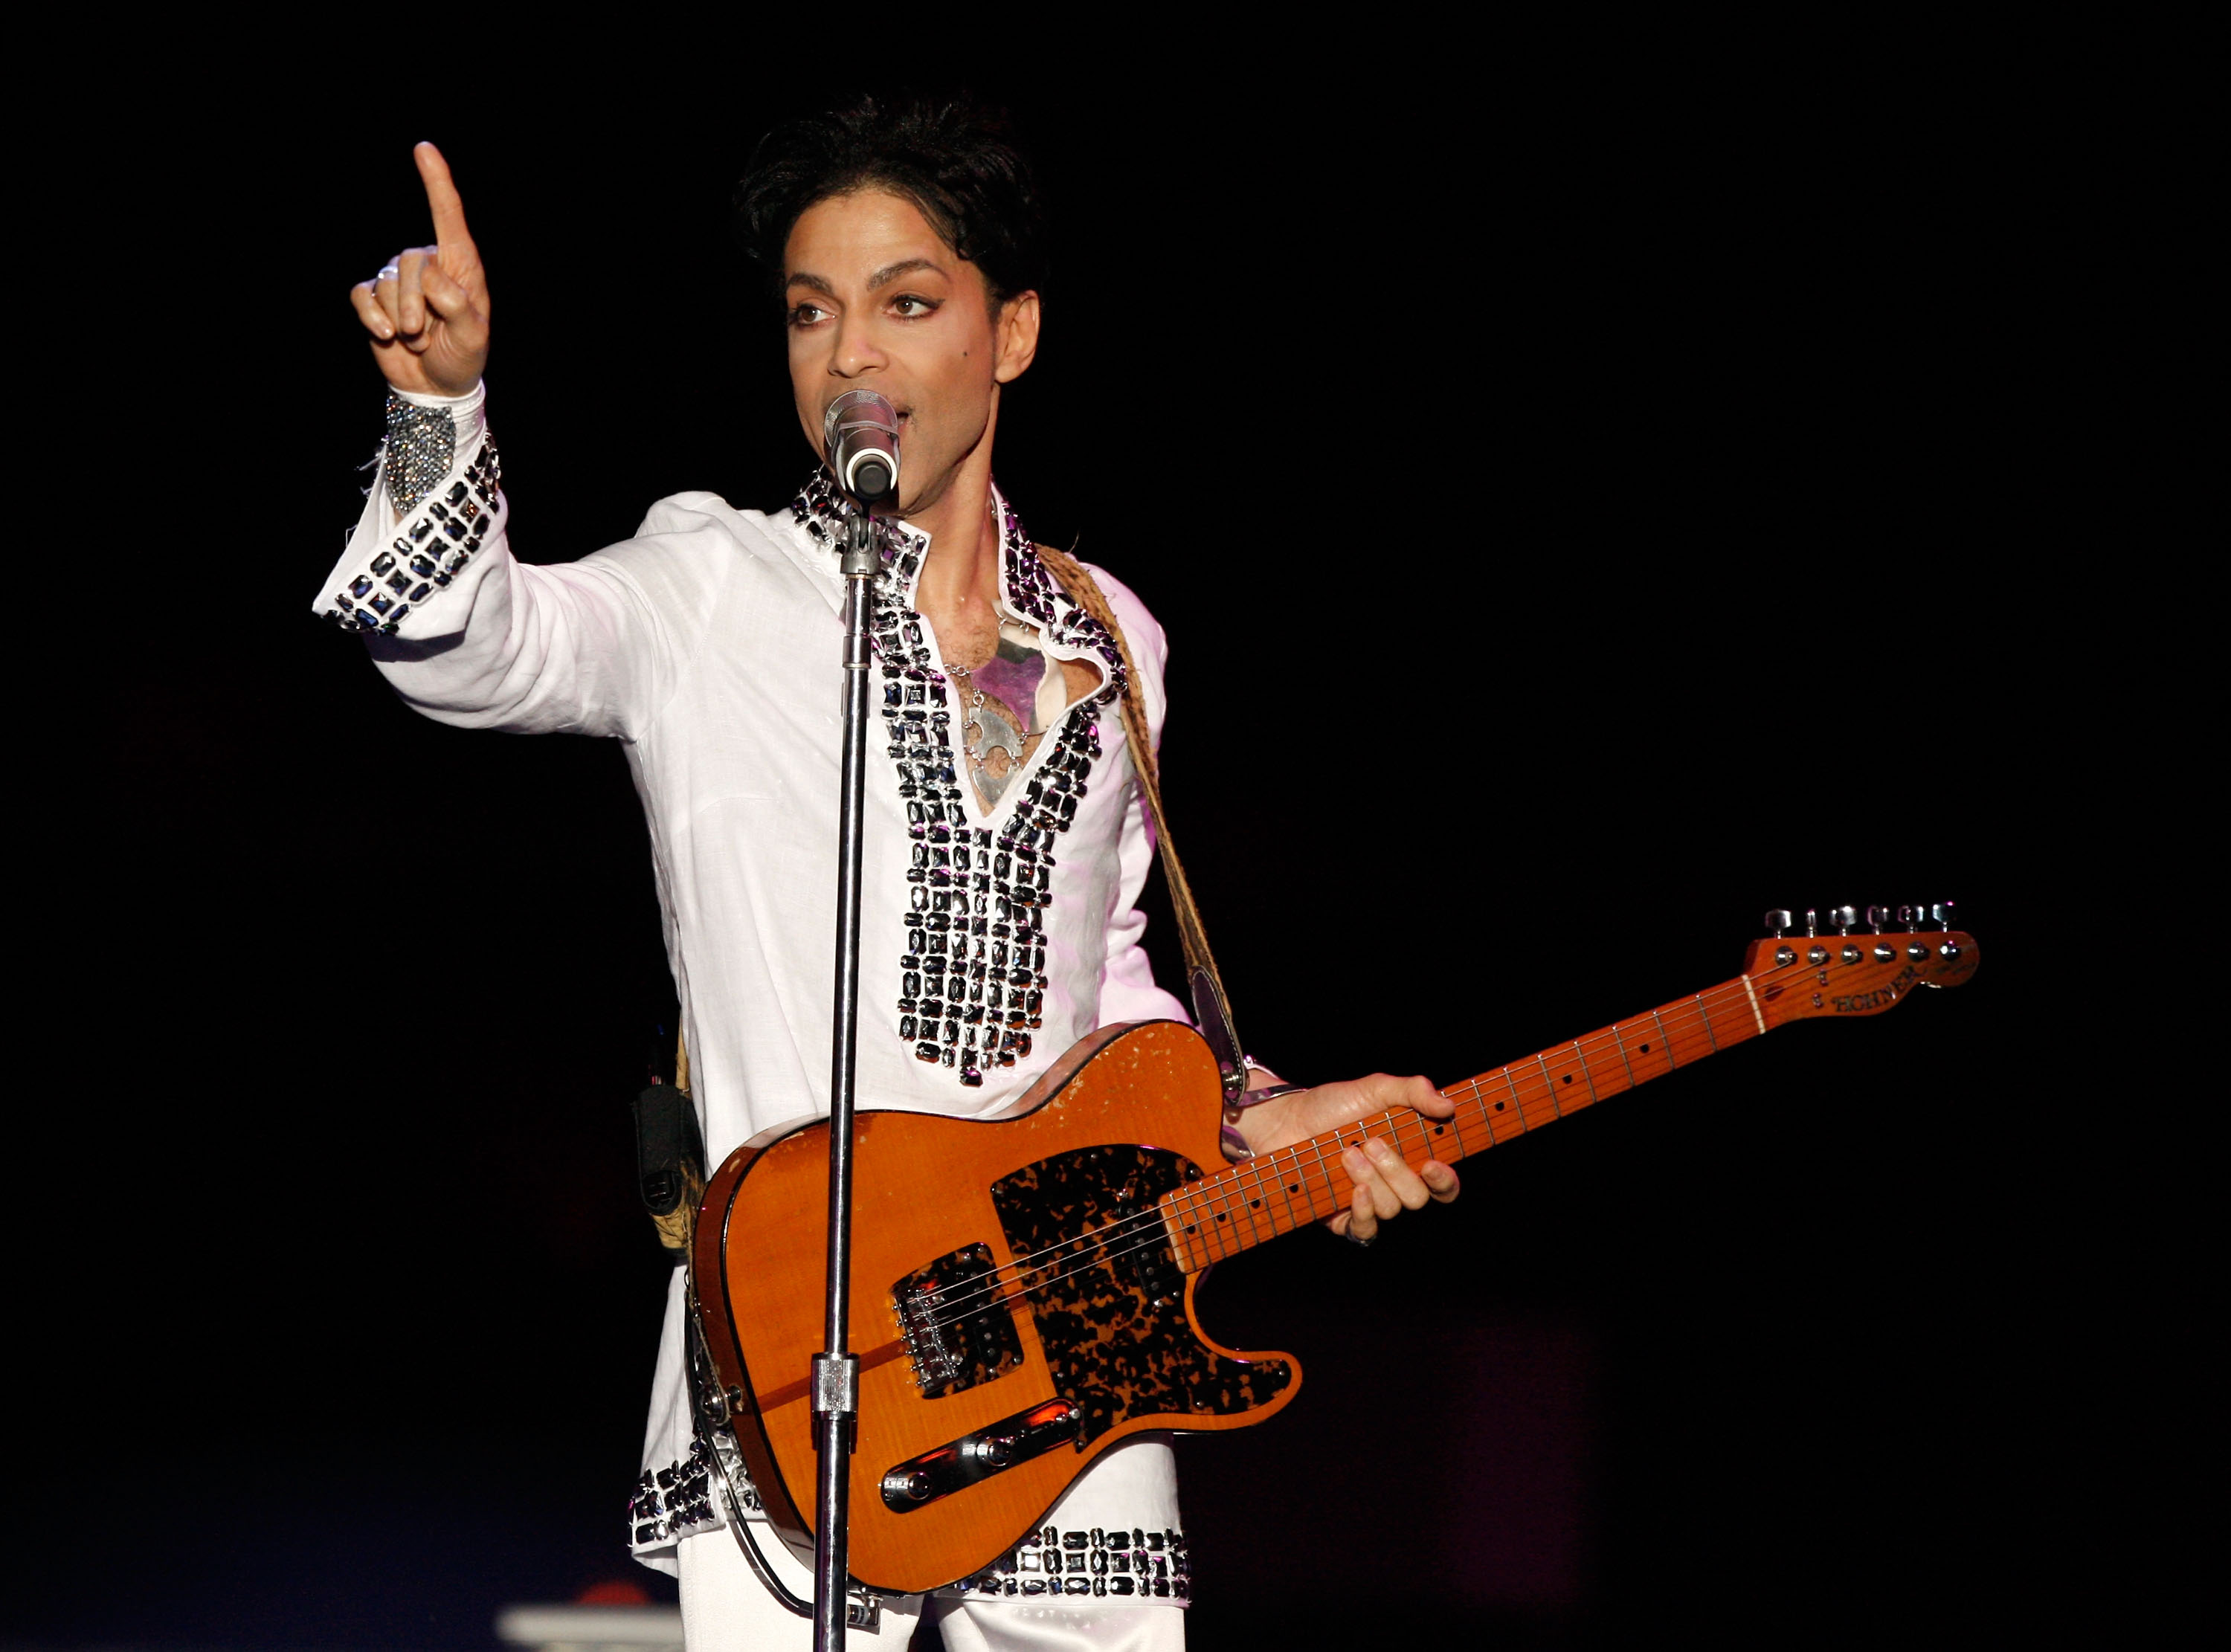 Prince’s Family Claims His Estate Has Not Paid Them A Cent